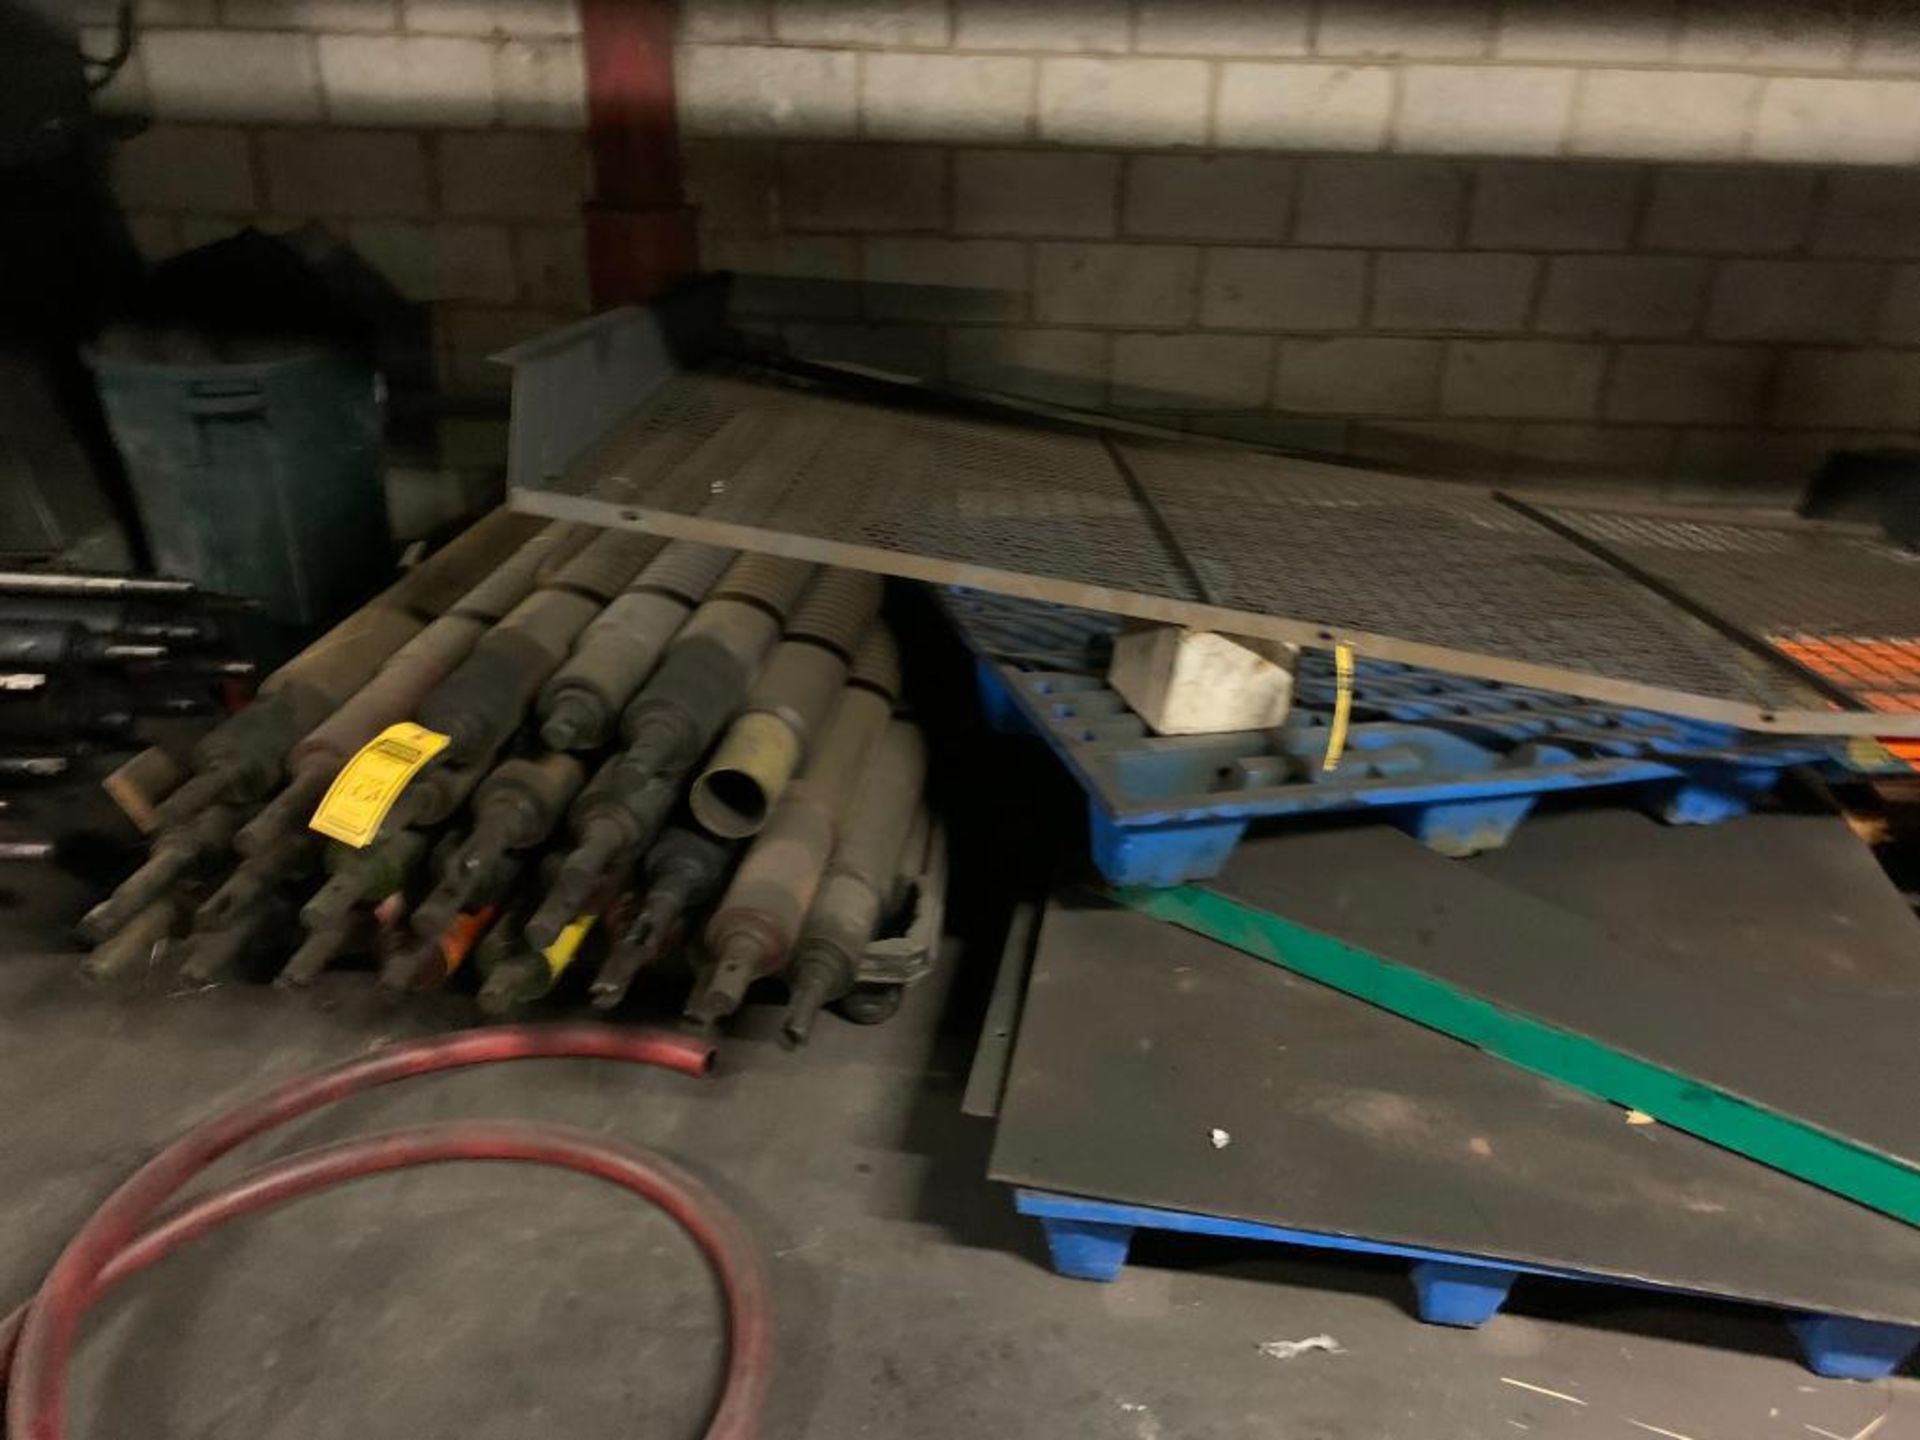 Assorted Press Machine Rolls, Push-Back Rack Pallets, Spools of Hose, Oil Separator Cans - Image 12 of 19